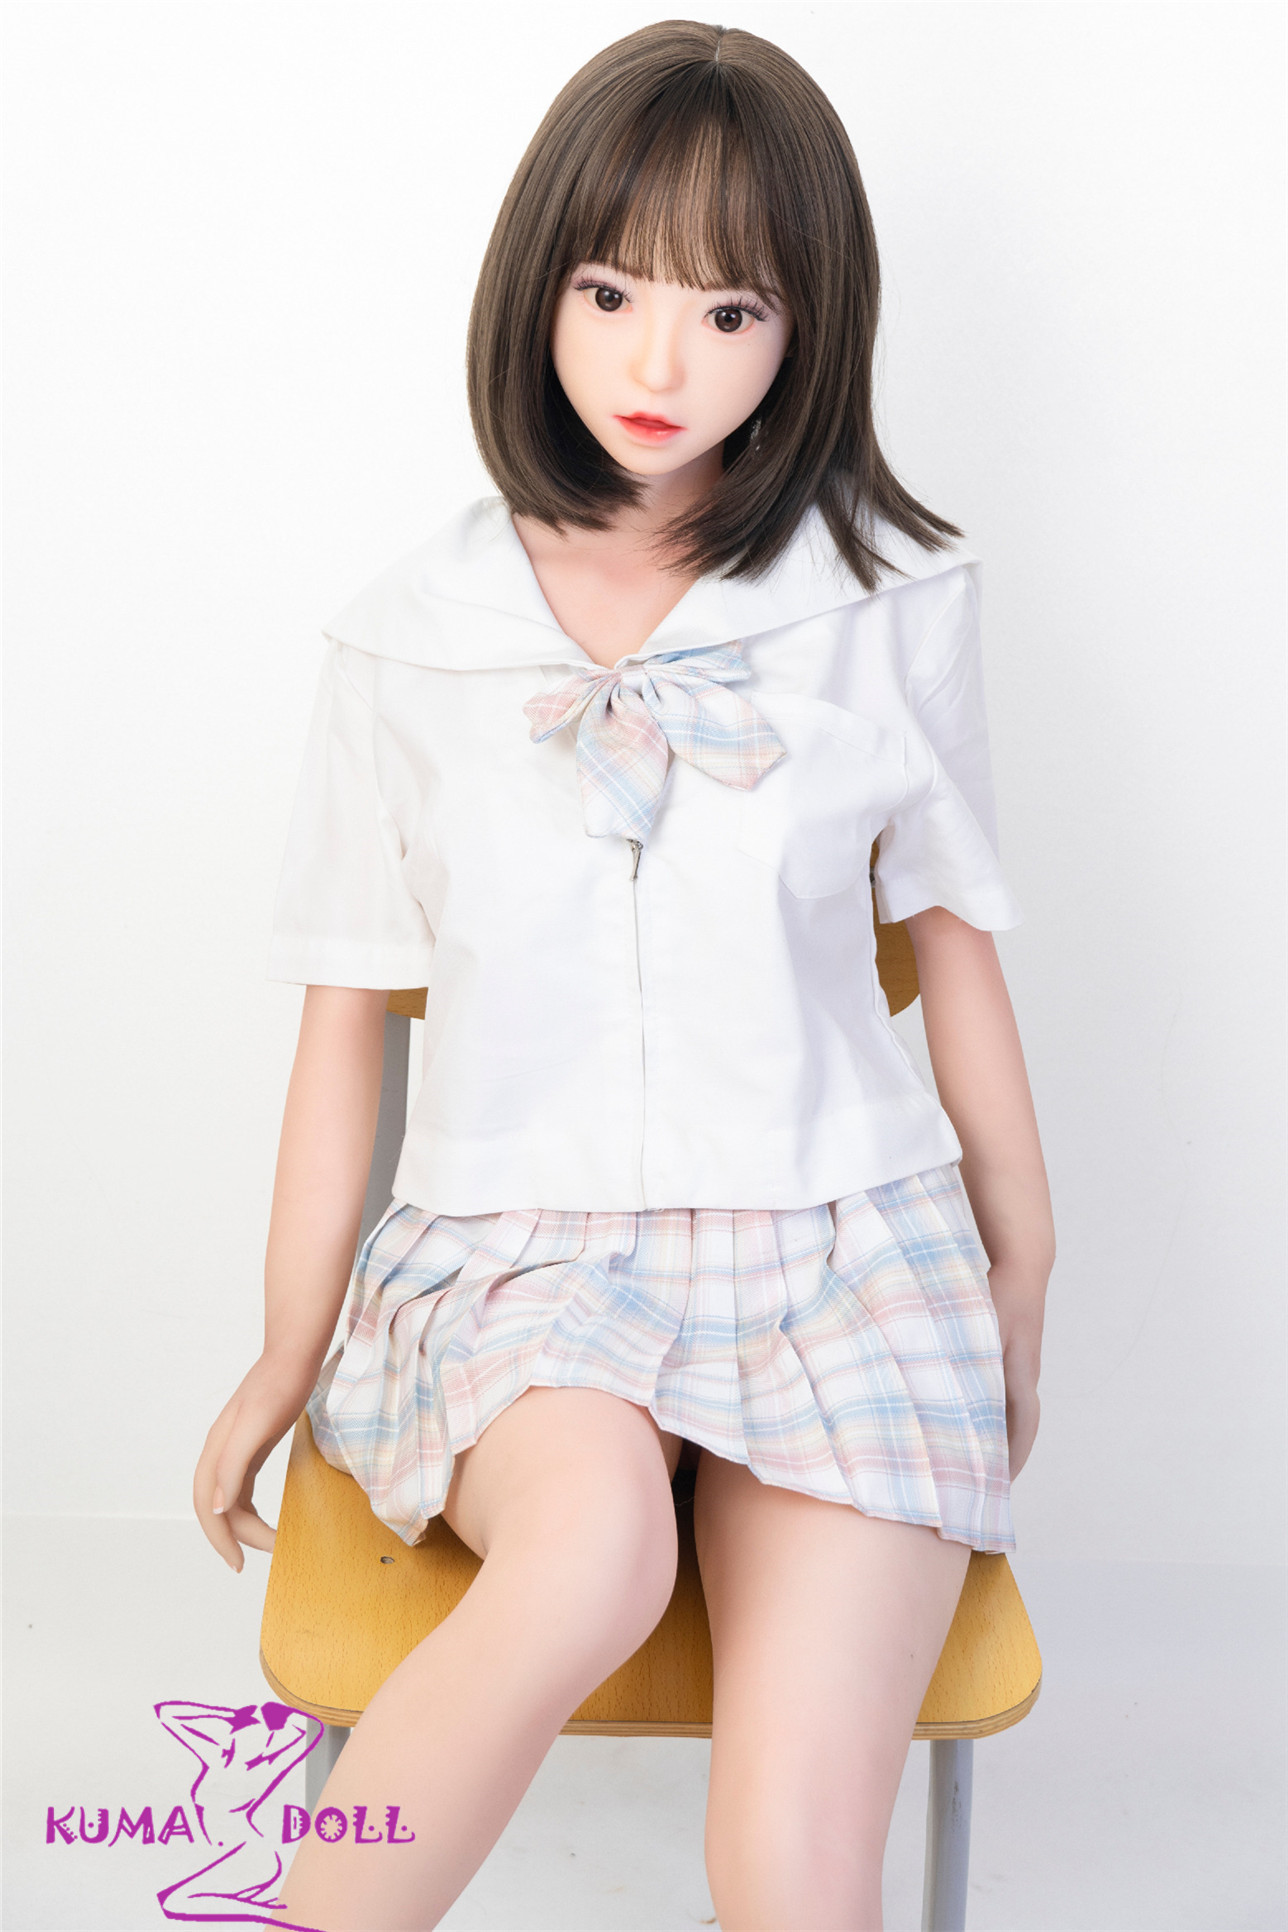 FUDOLL Love Doll #8頭部 TPE Material Body Head Material, Height, etc.